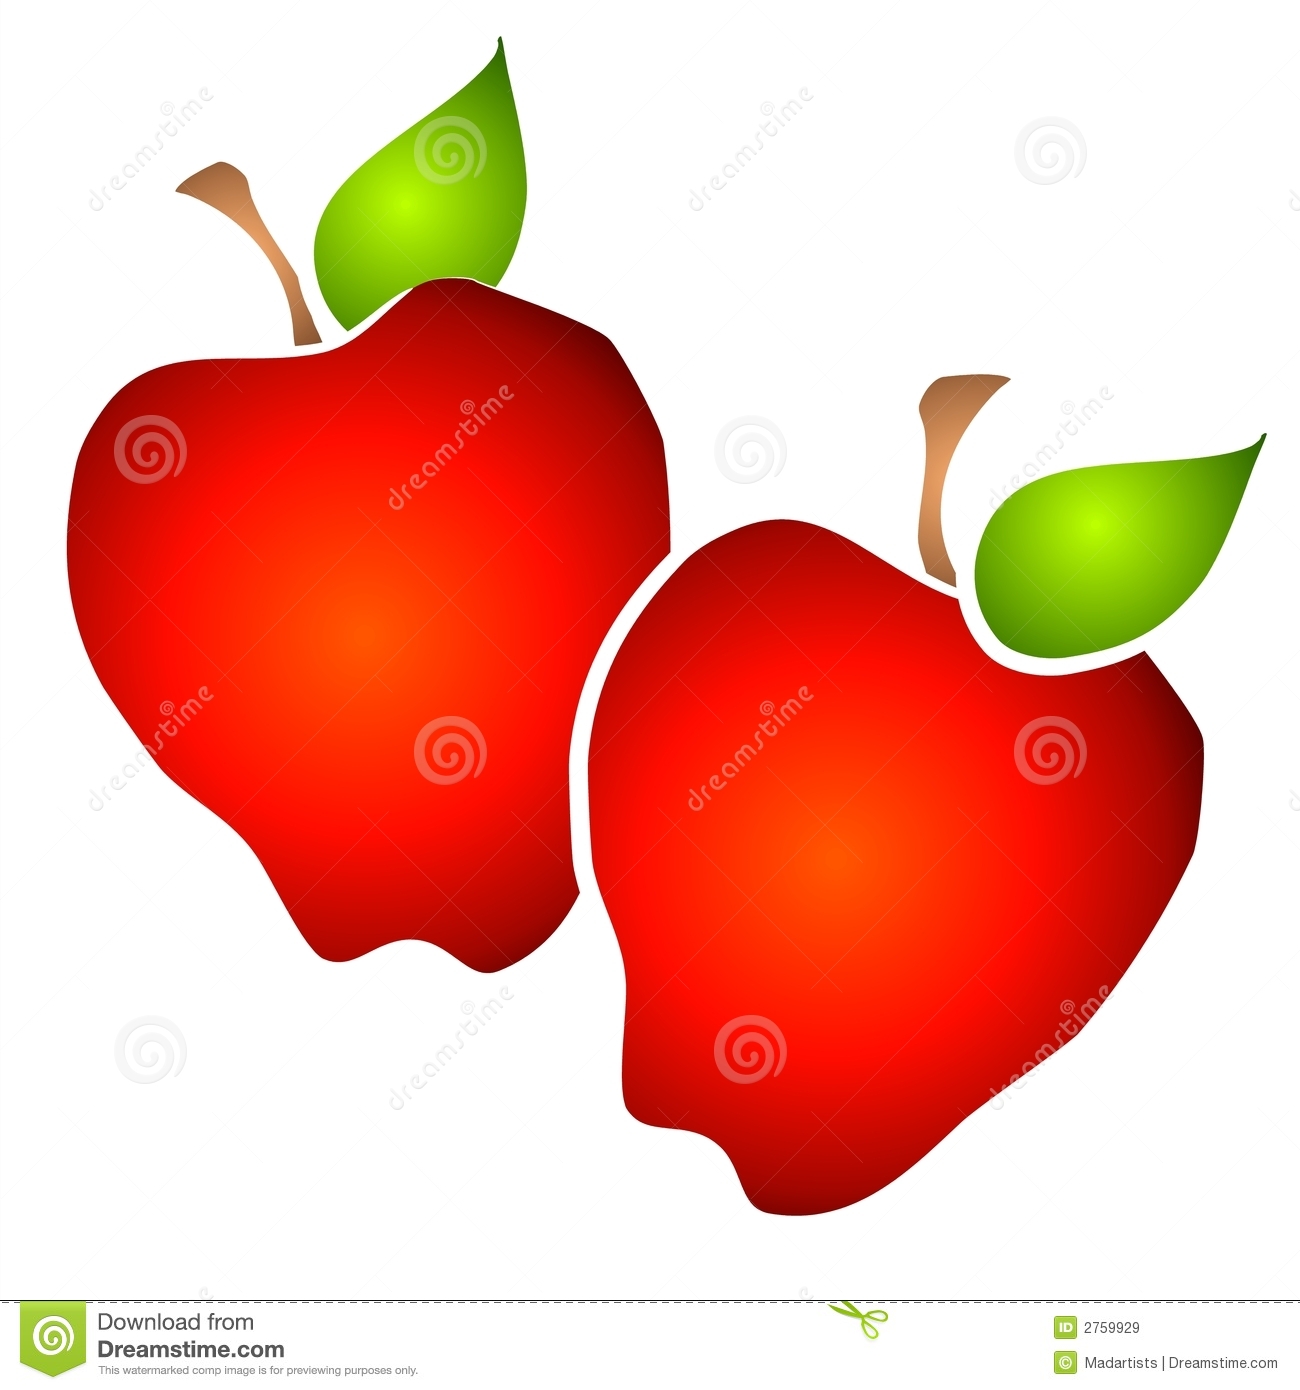 Red Apples Side By Side With Rich Gradient Colors On A White